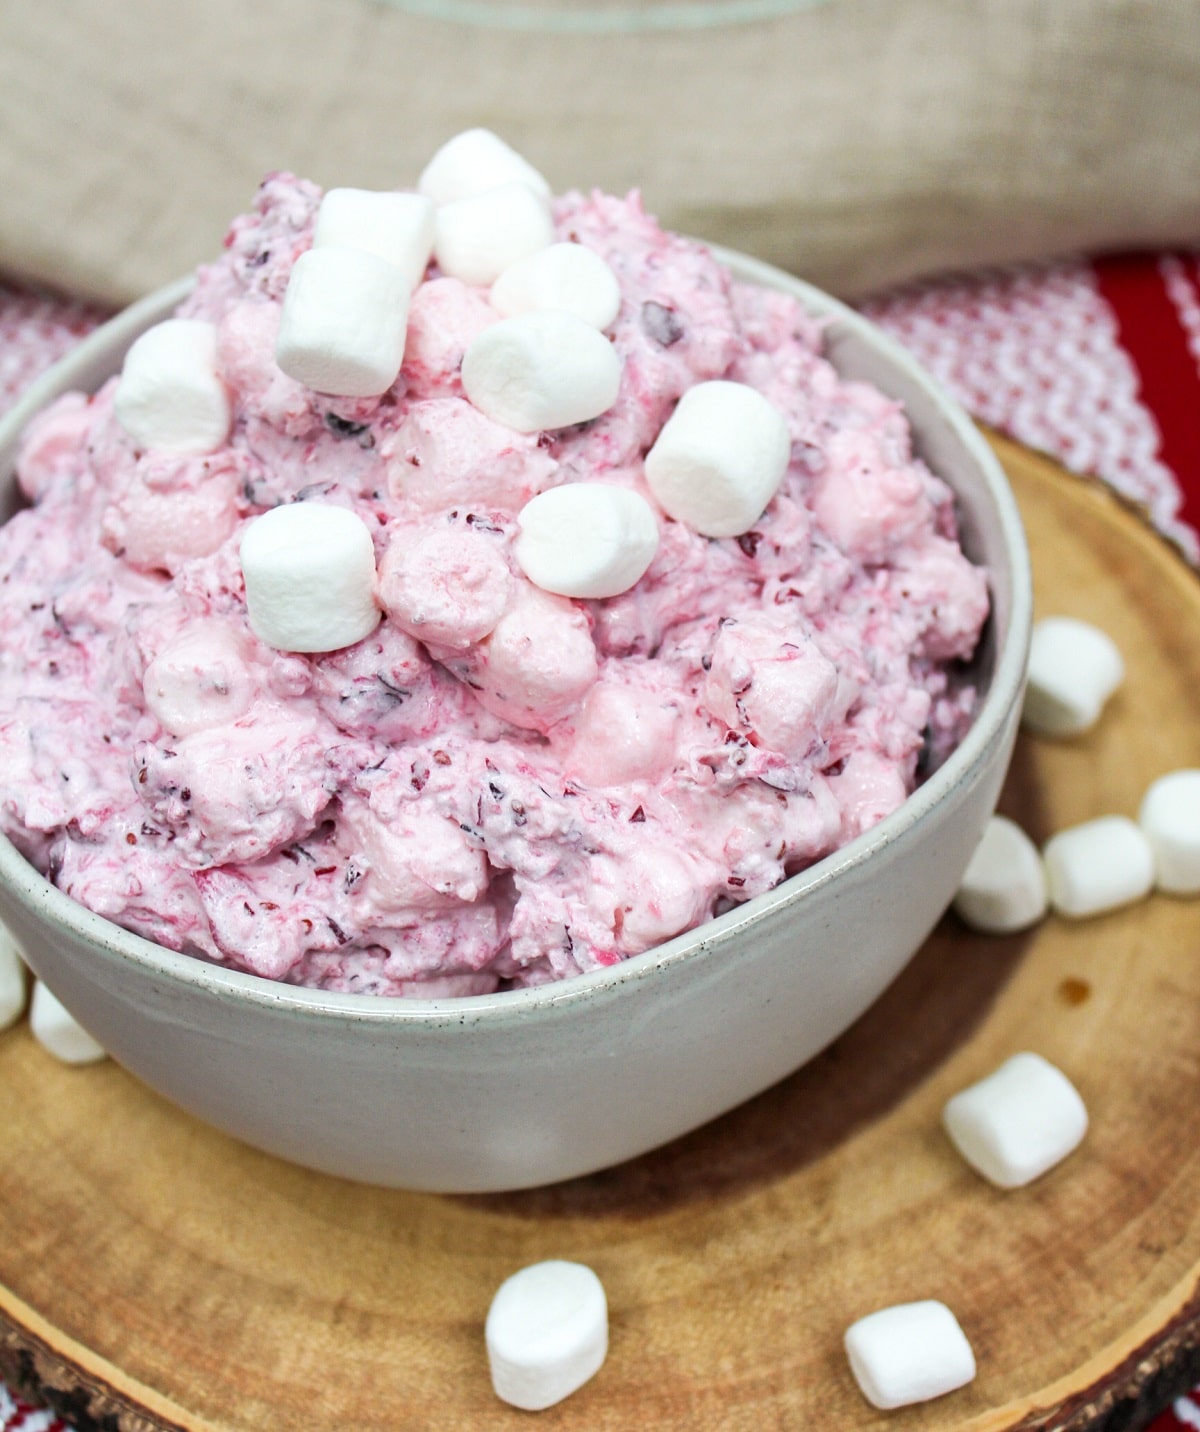 cranberry fluff salad in a bowl